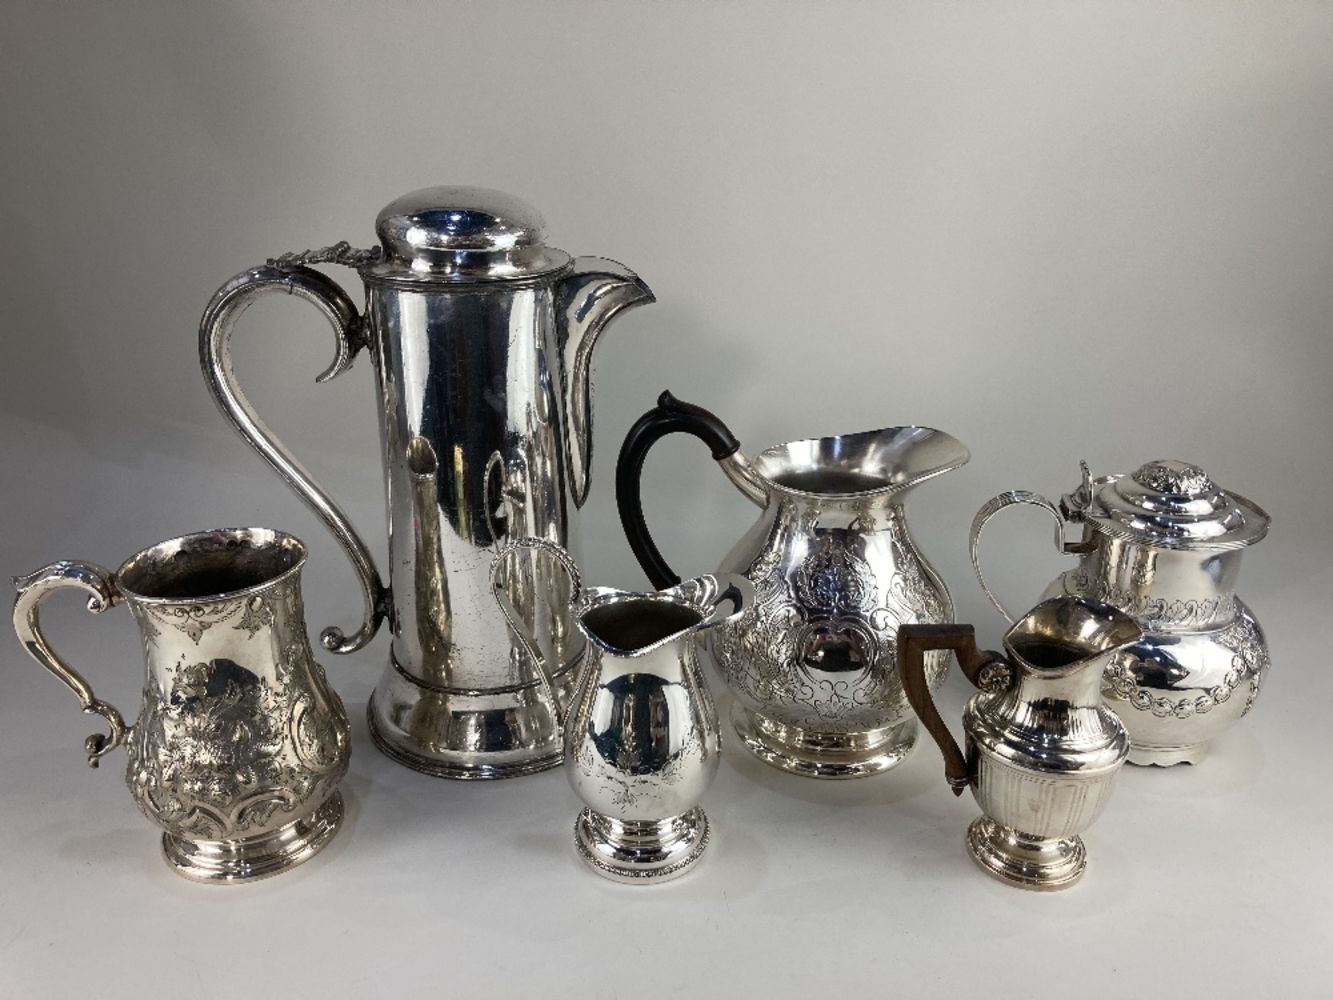 The September Auctions - Silver and Metal ware, Jewellery, Watches and Coins